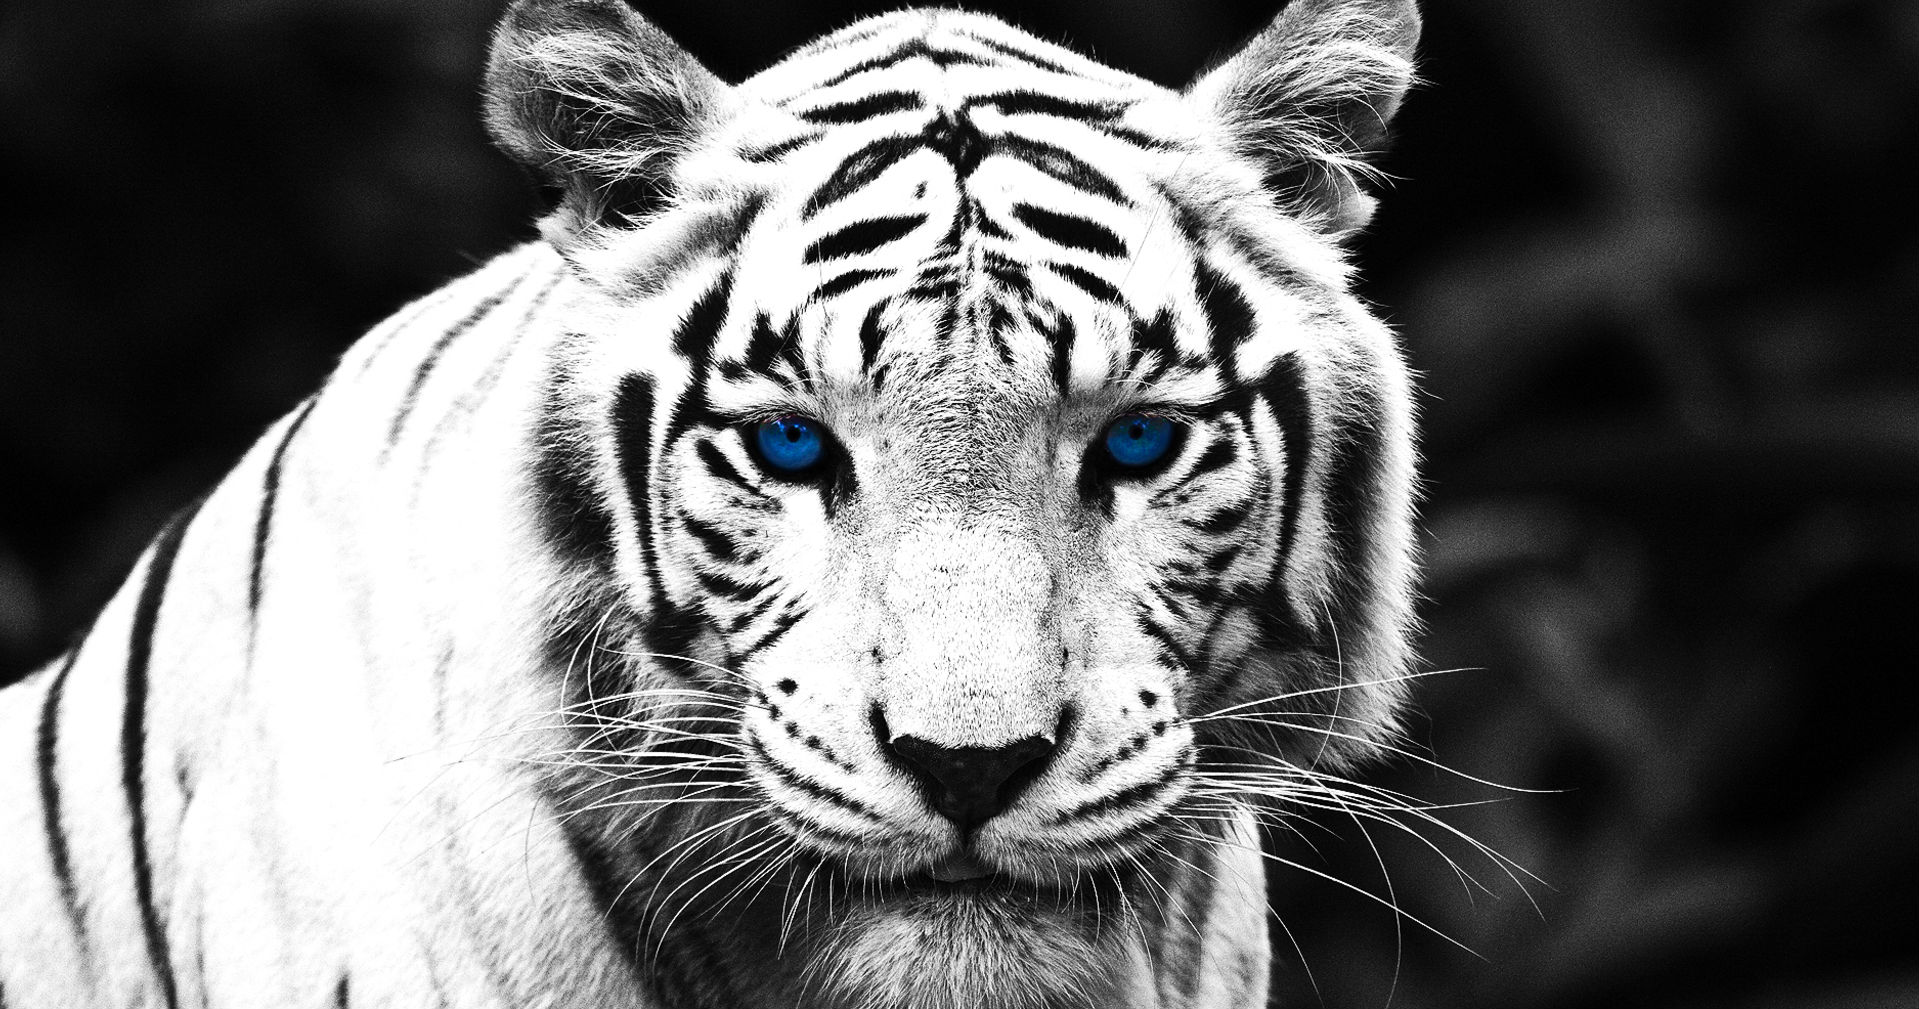 tiger wallpapers